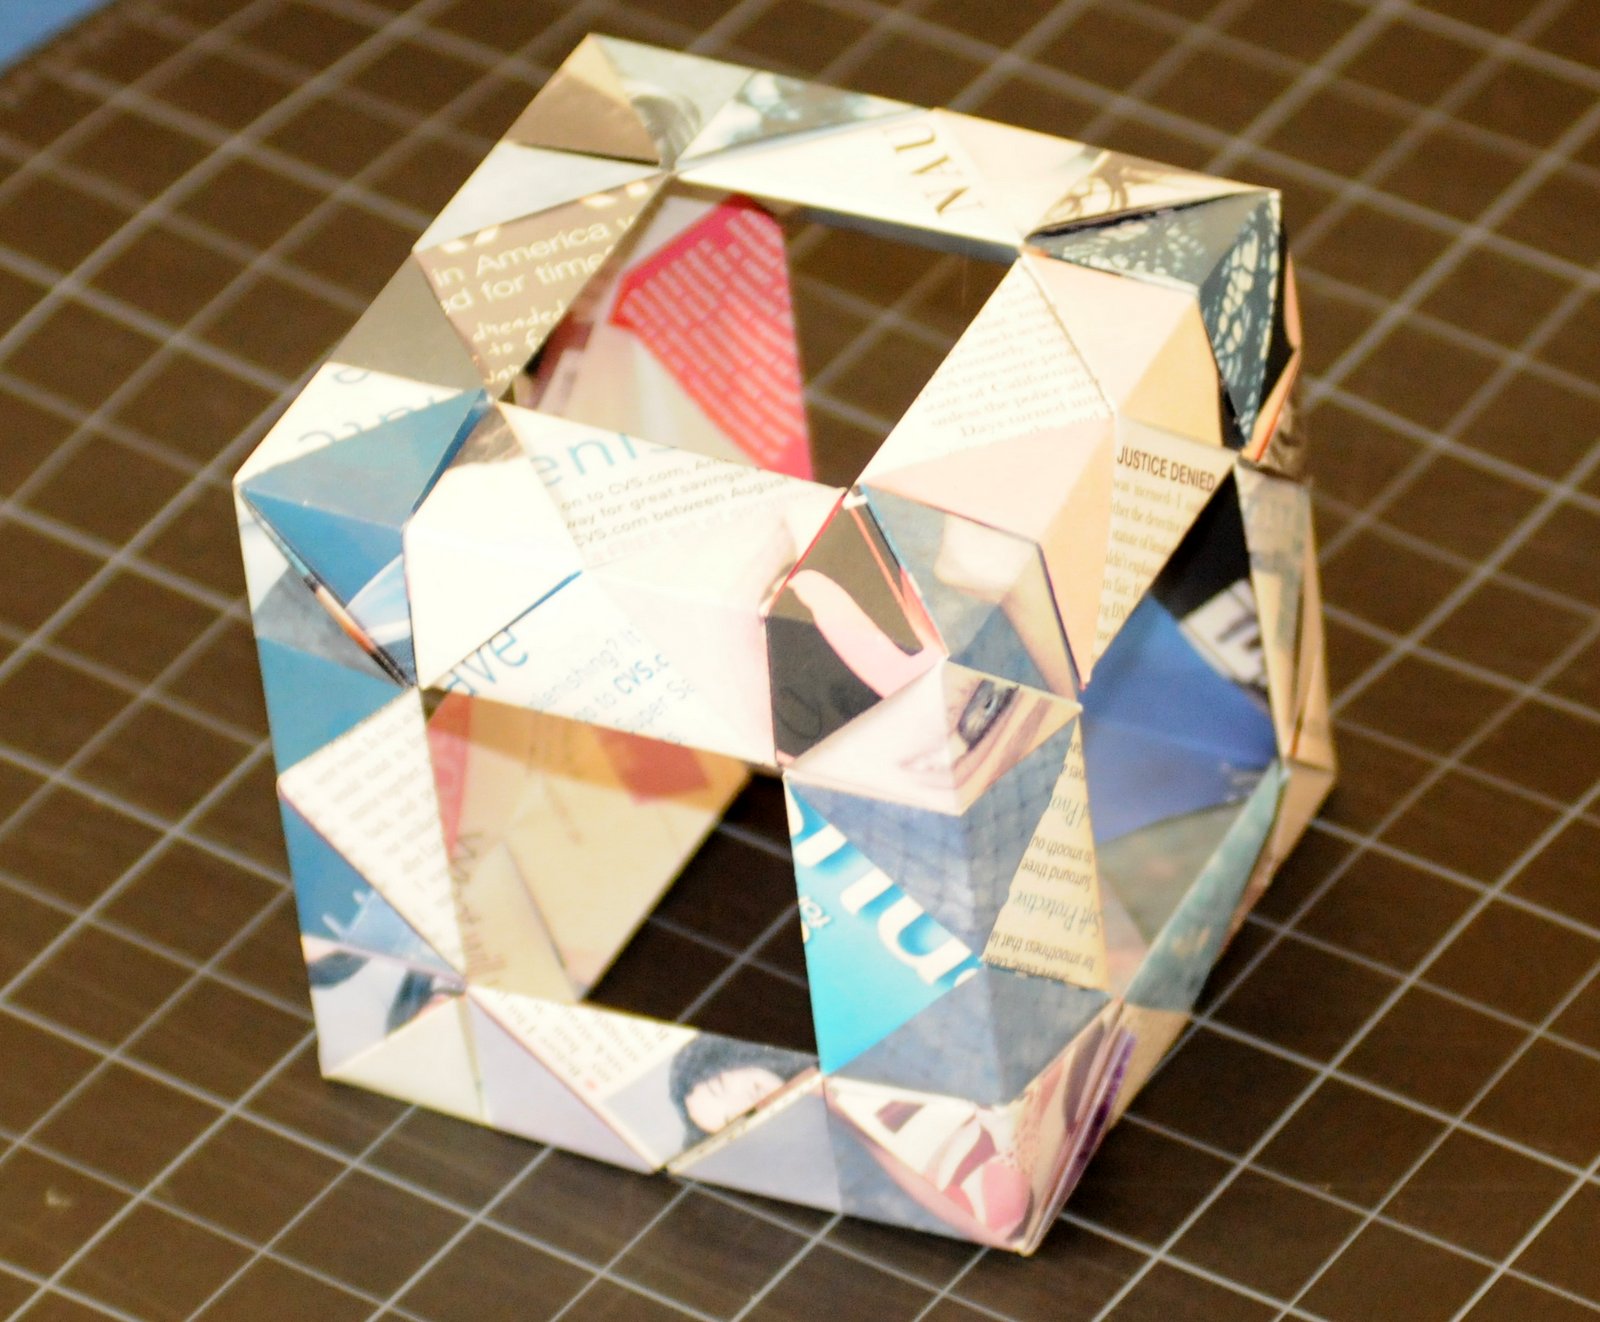 a cube shape made out of folded paper elements